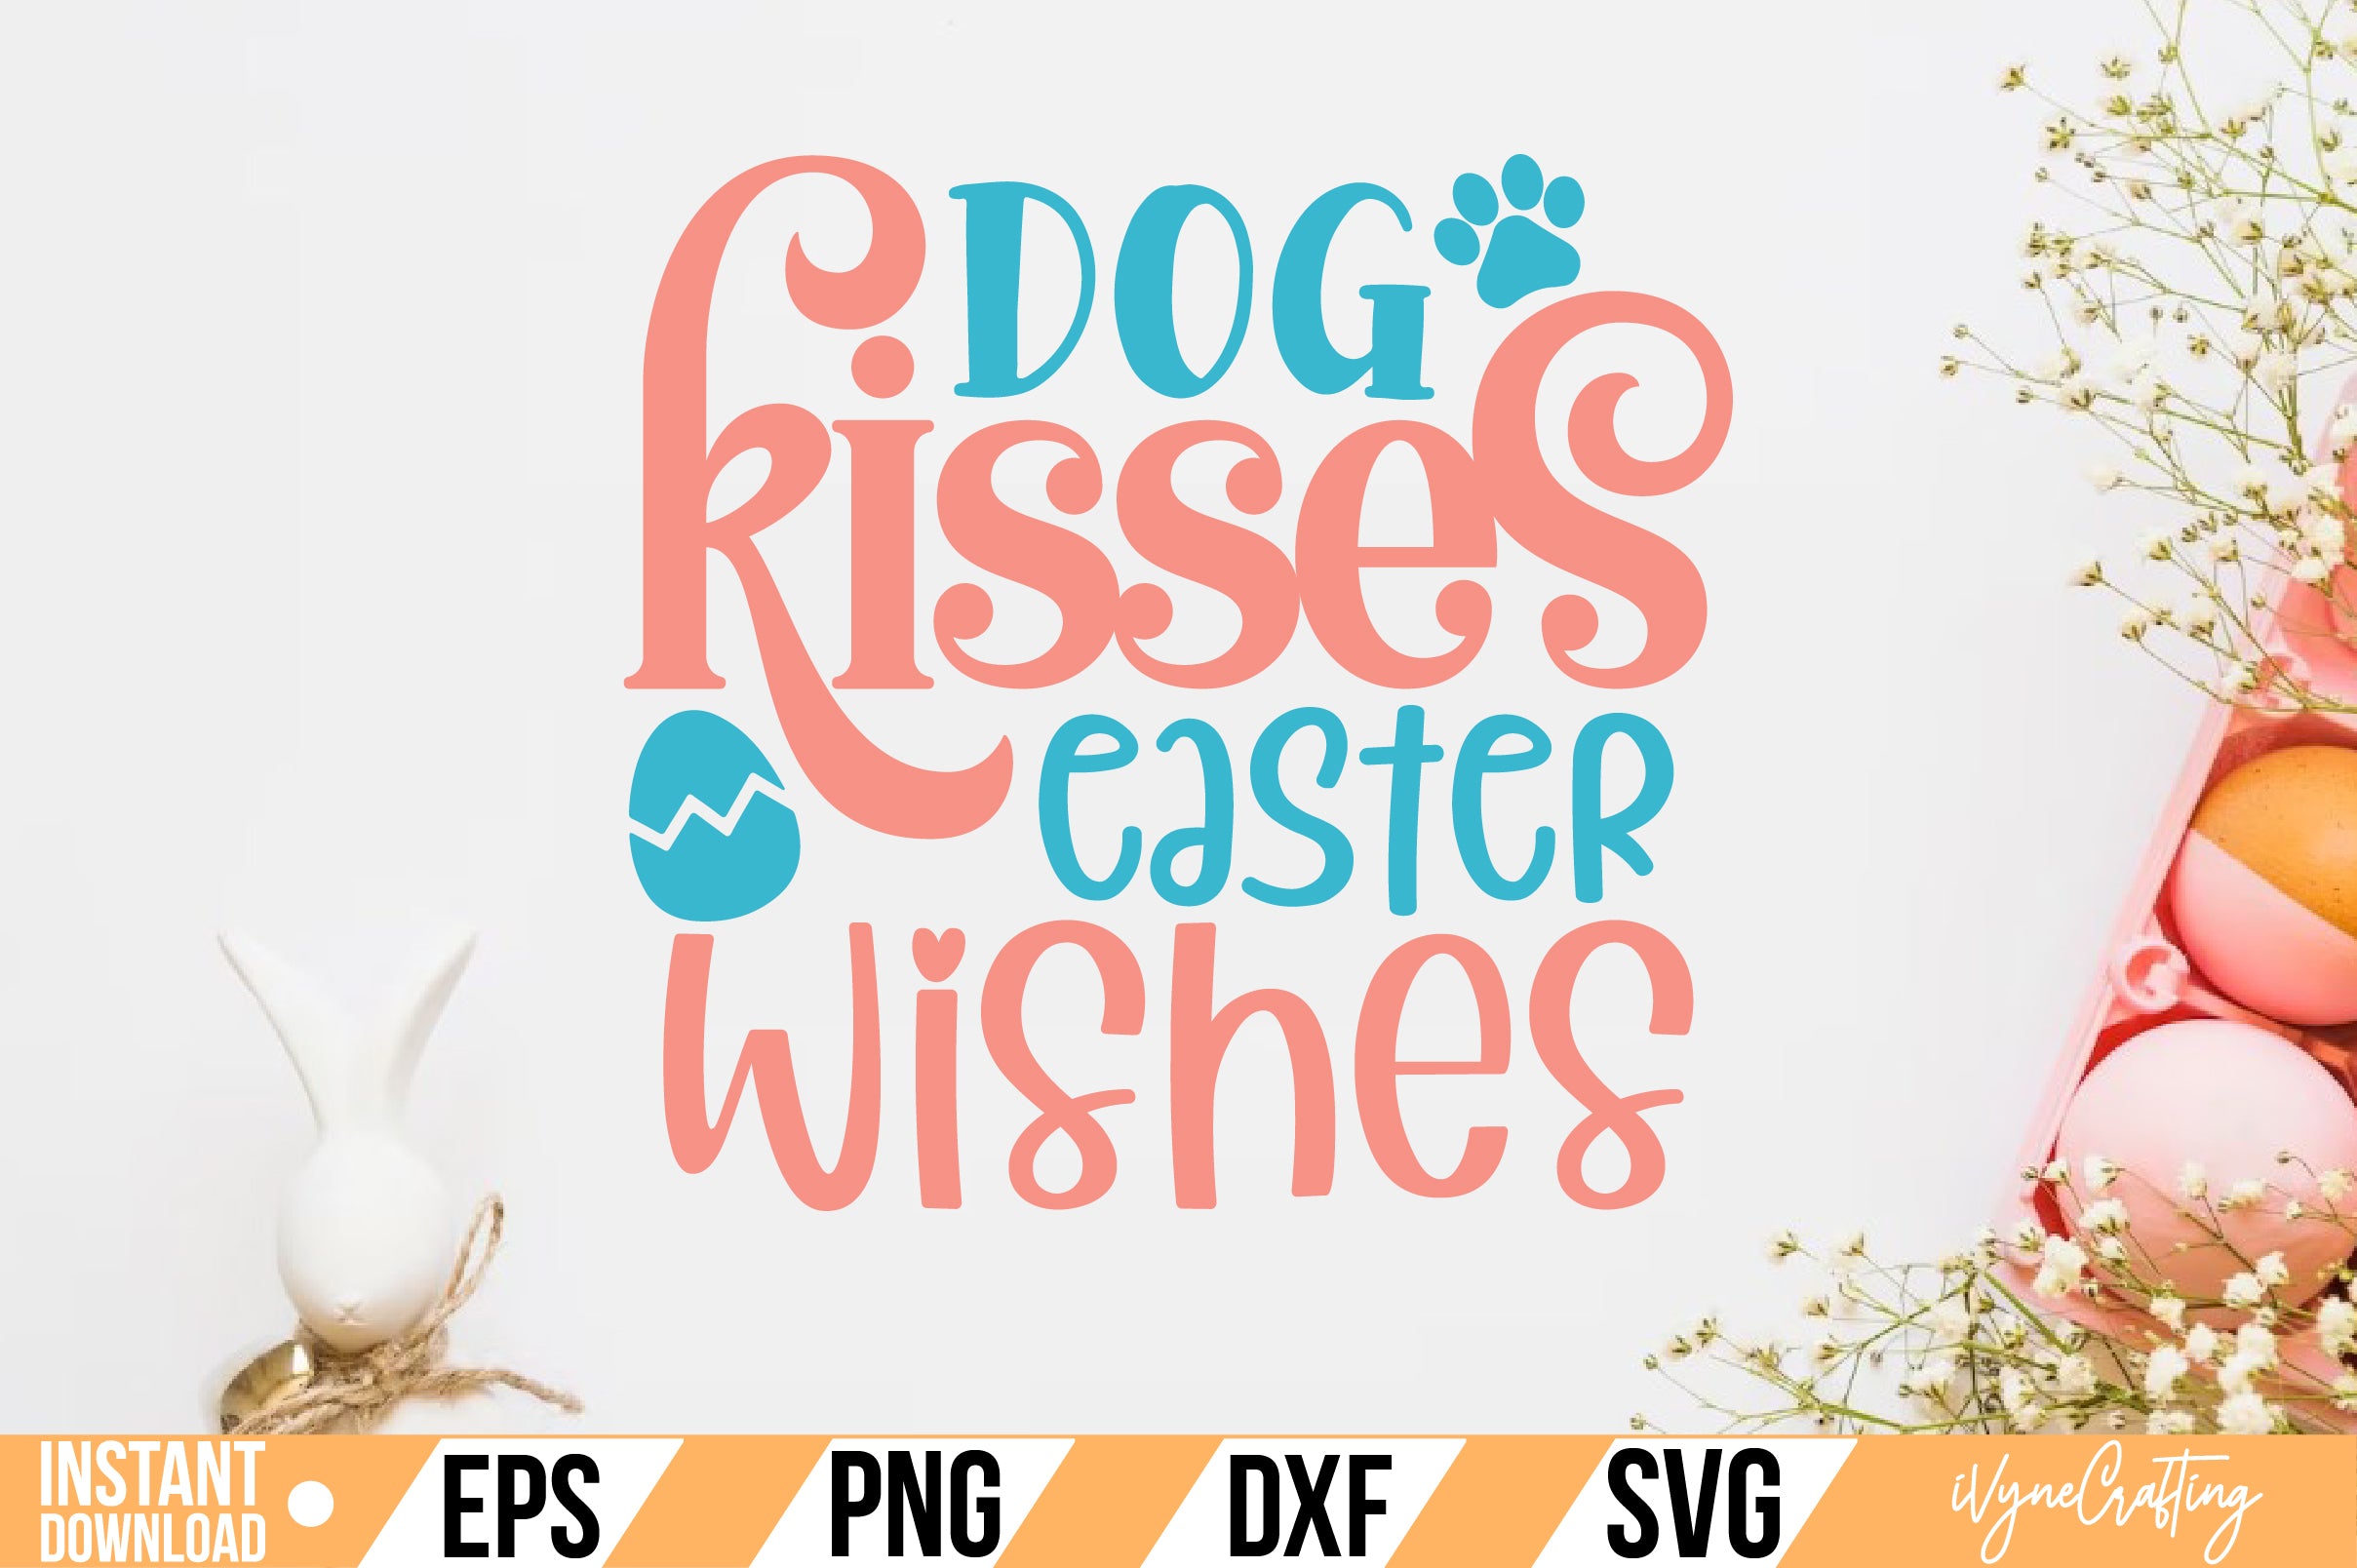 dog kisses easter wishes